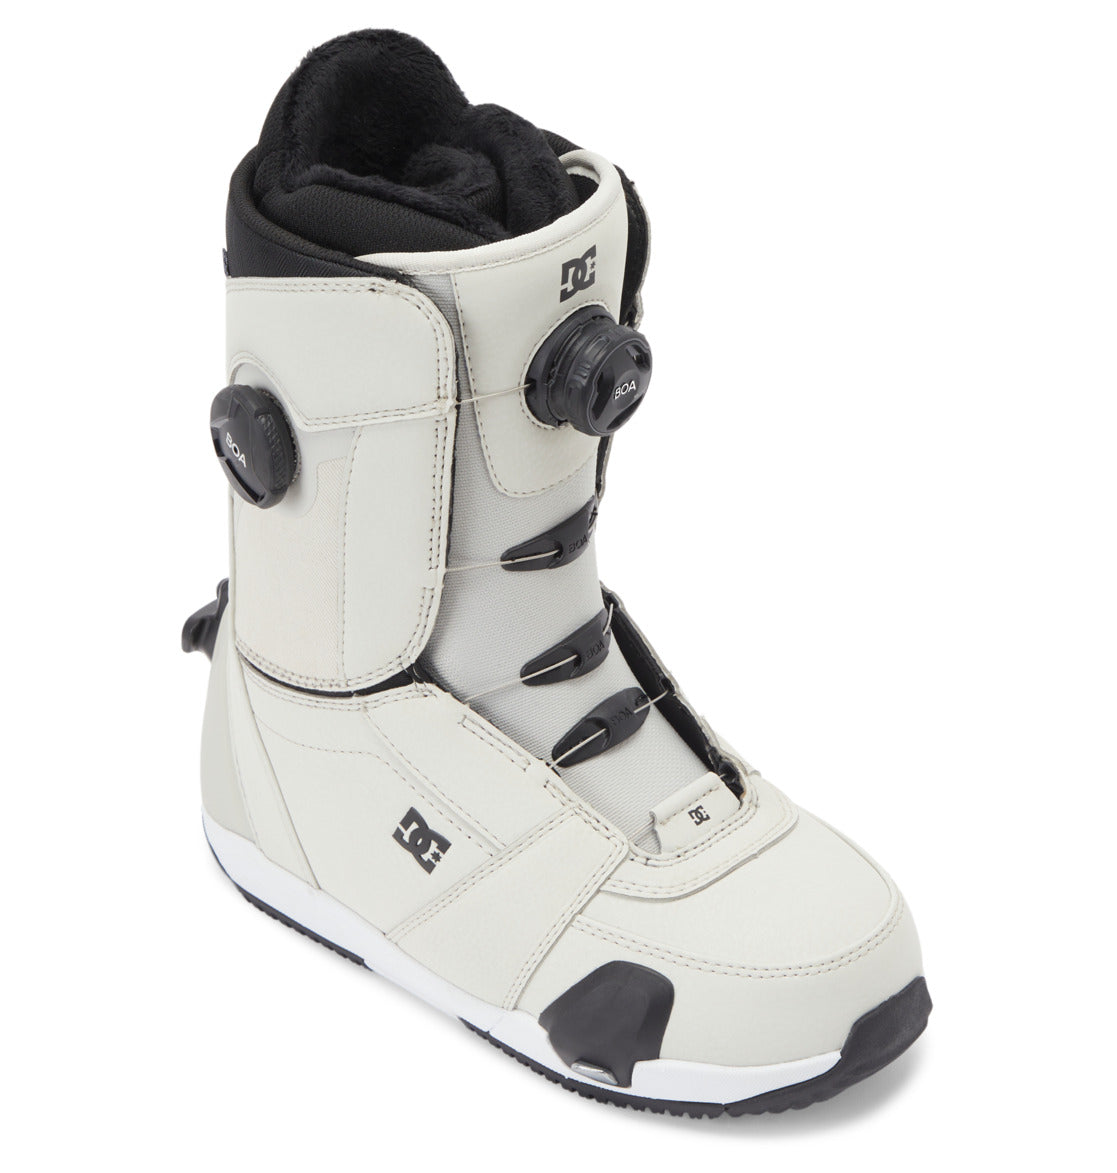 Women's Lotus Step On® Snowboard Boots - DC Shoes